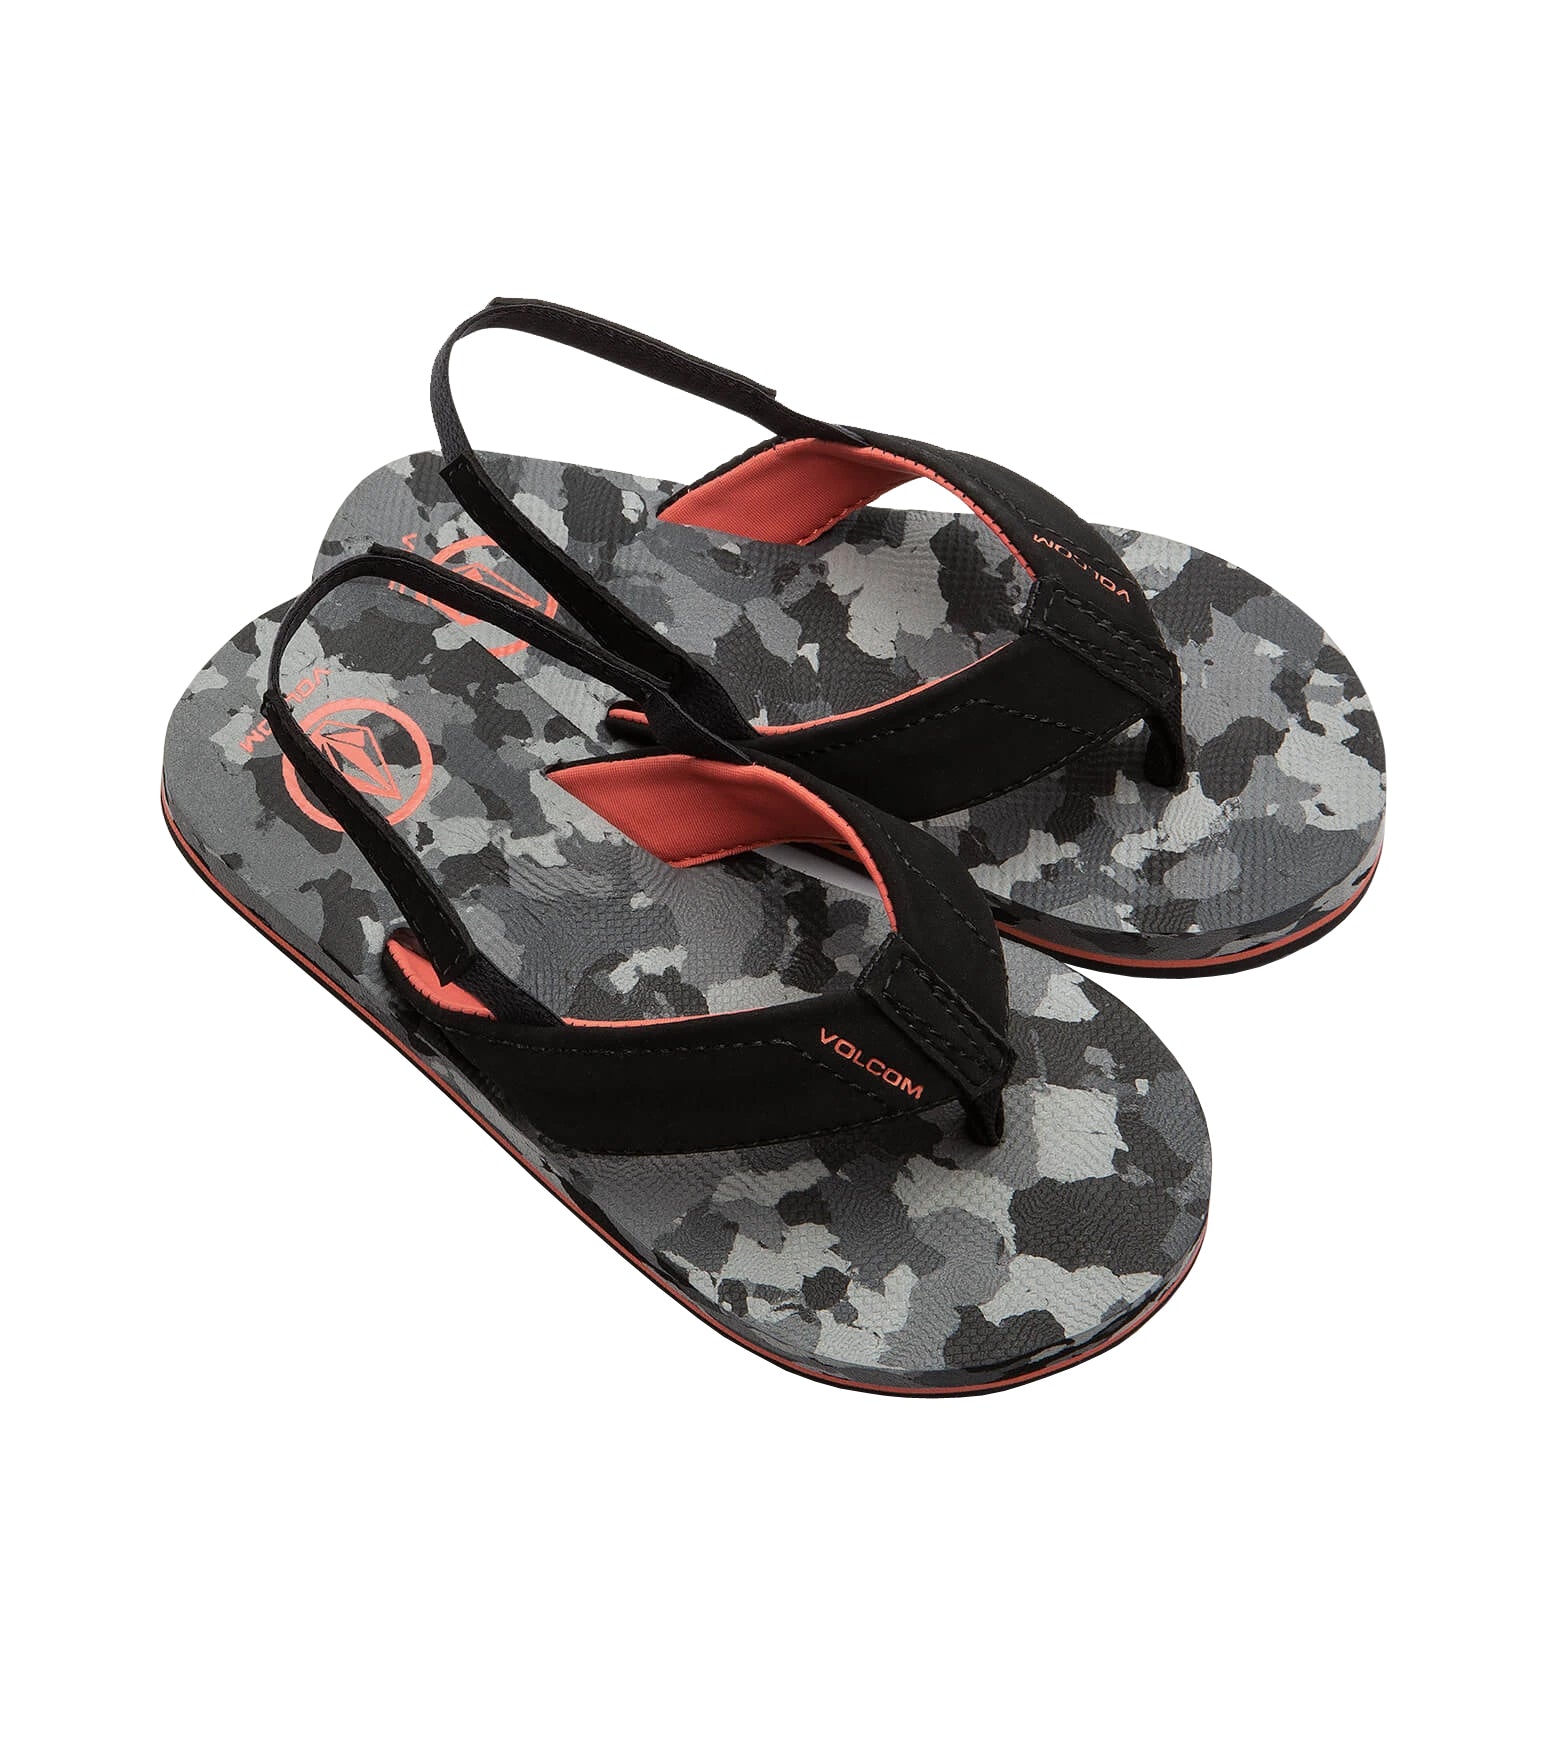 Volcom Victor Little Youth Boys Sandal CAM-Camouflage 13 C